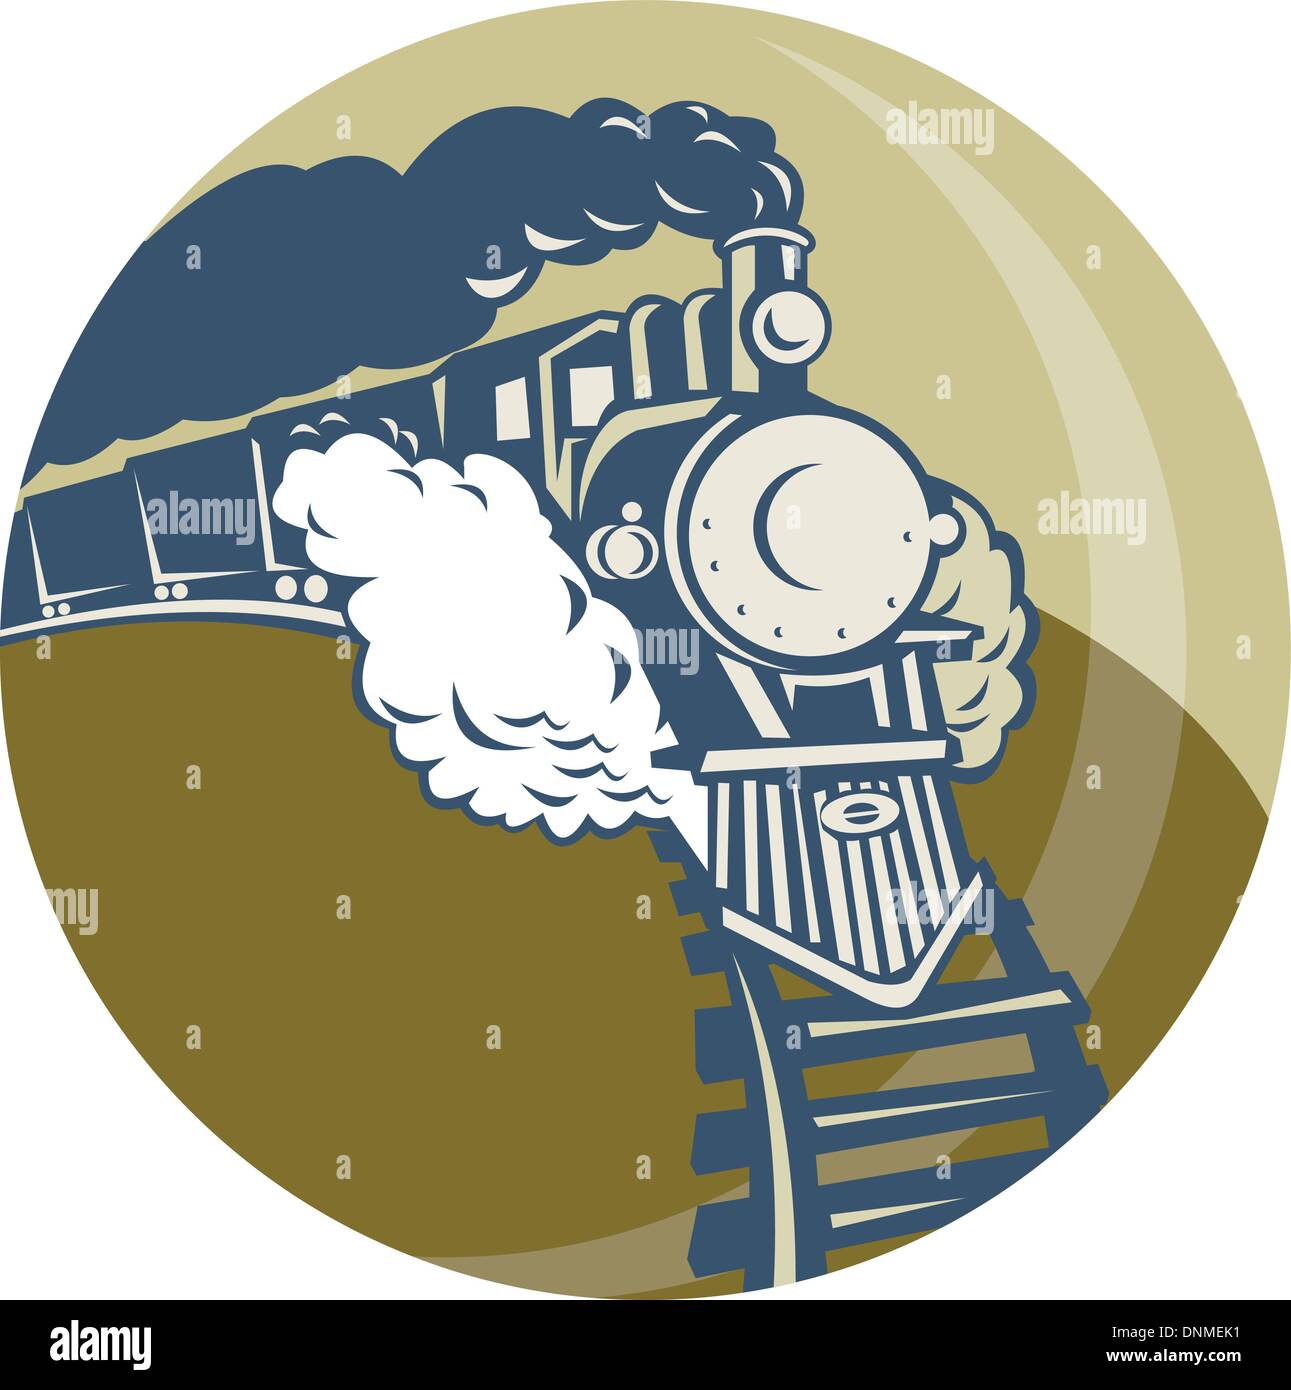 illustration of a Steam train or locomotive coming up set inside a circle Stock Vector